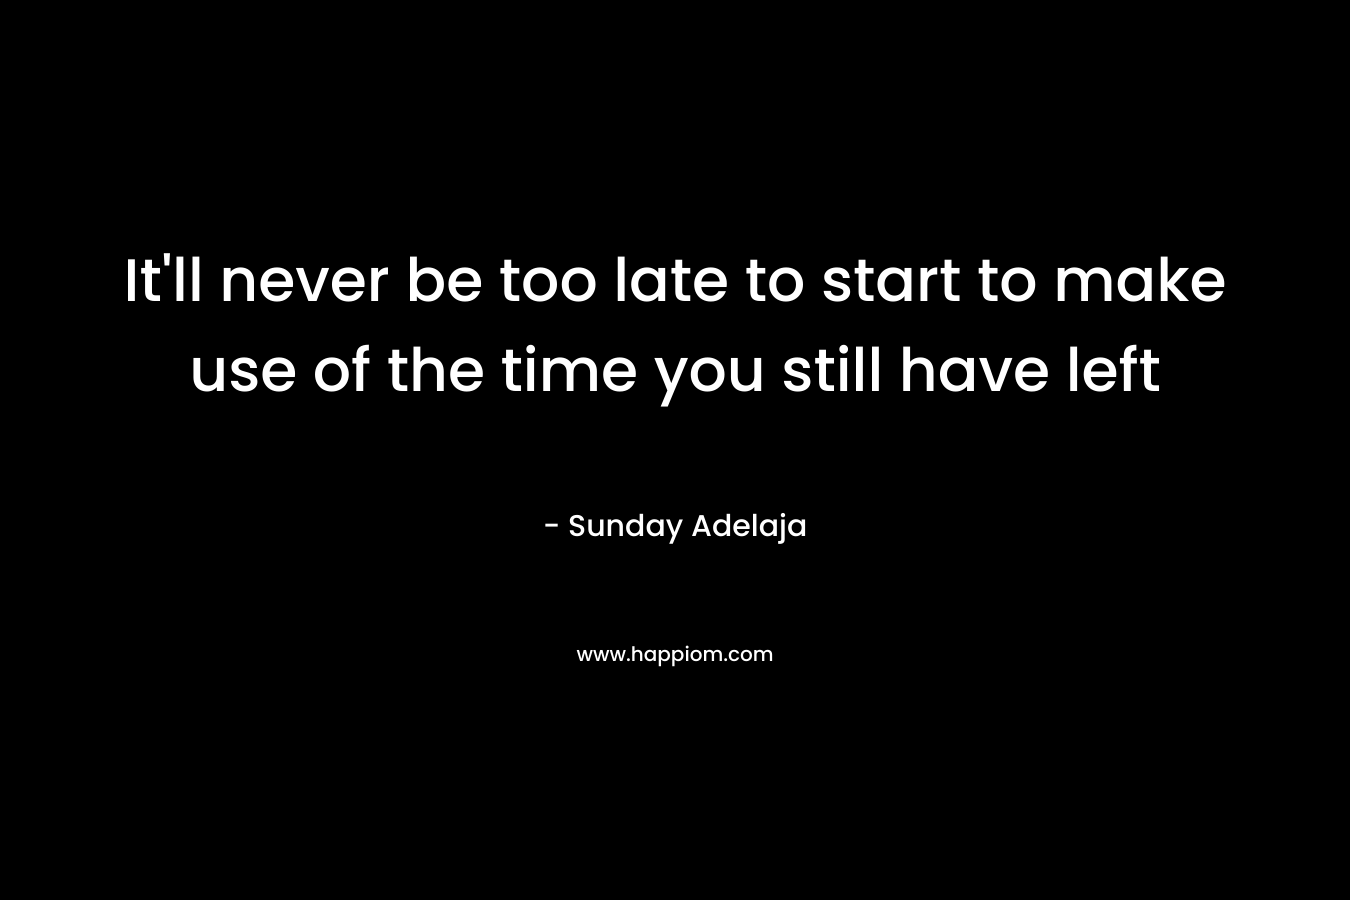 It'll never be too late to start to make use of the time you still have left